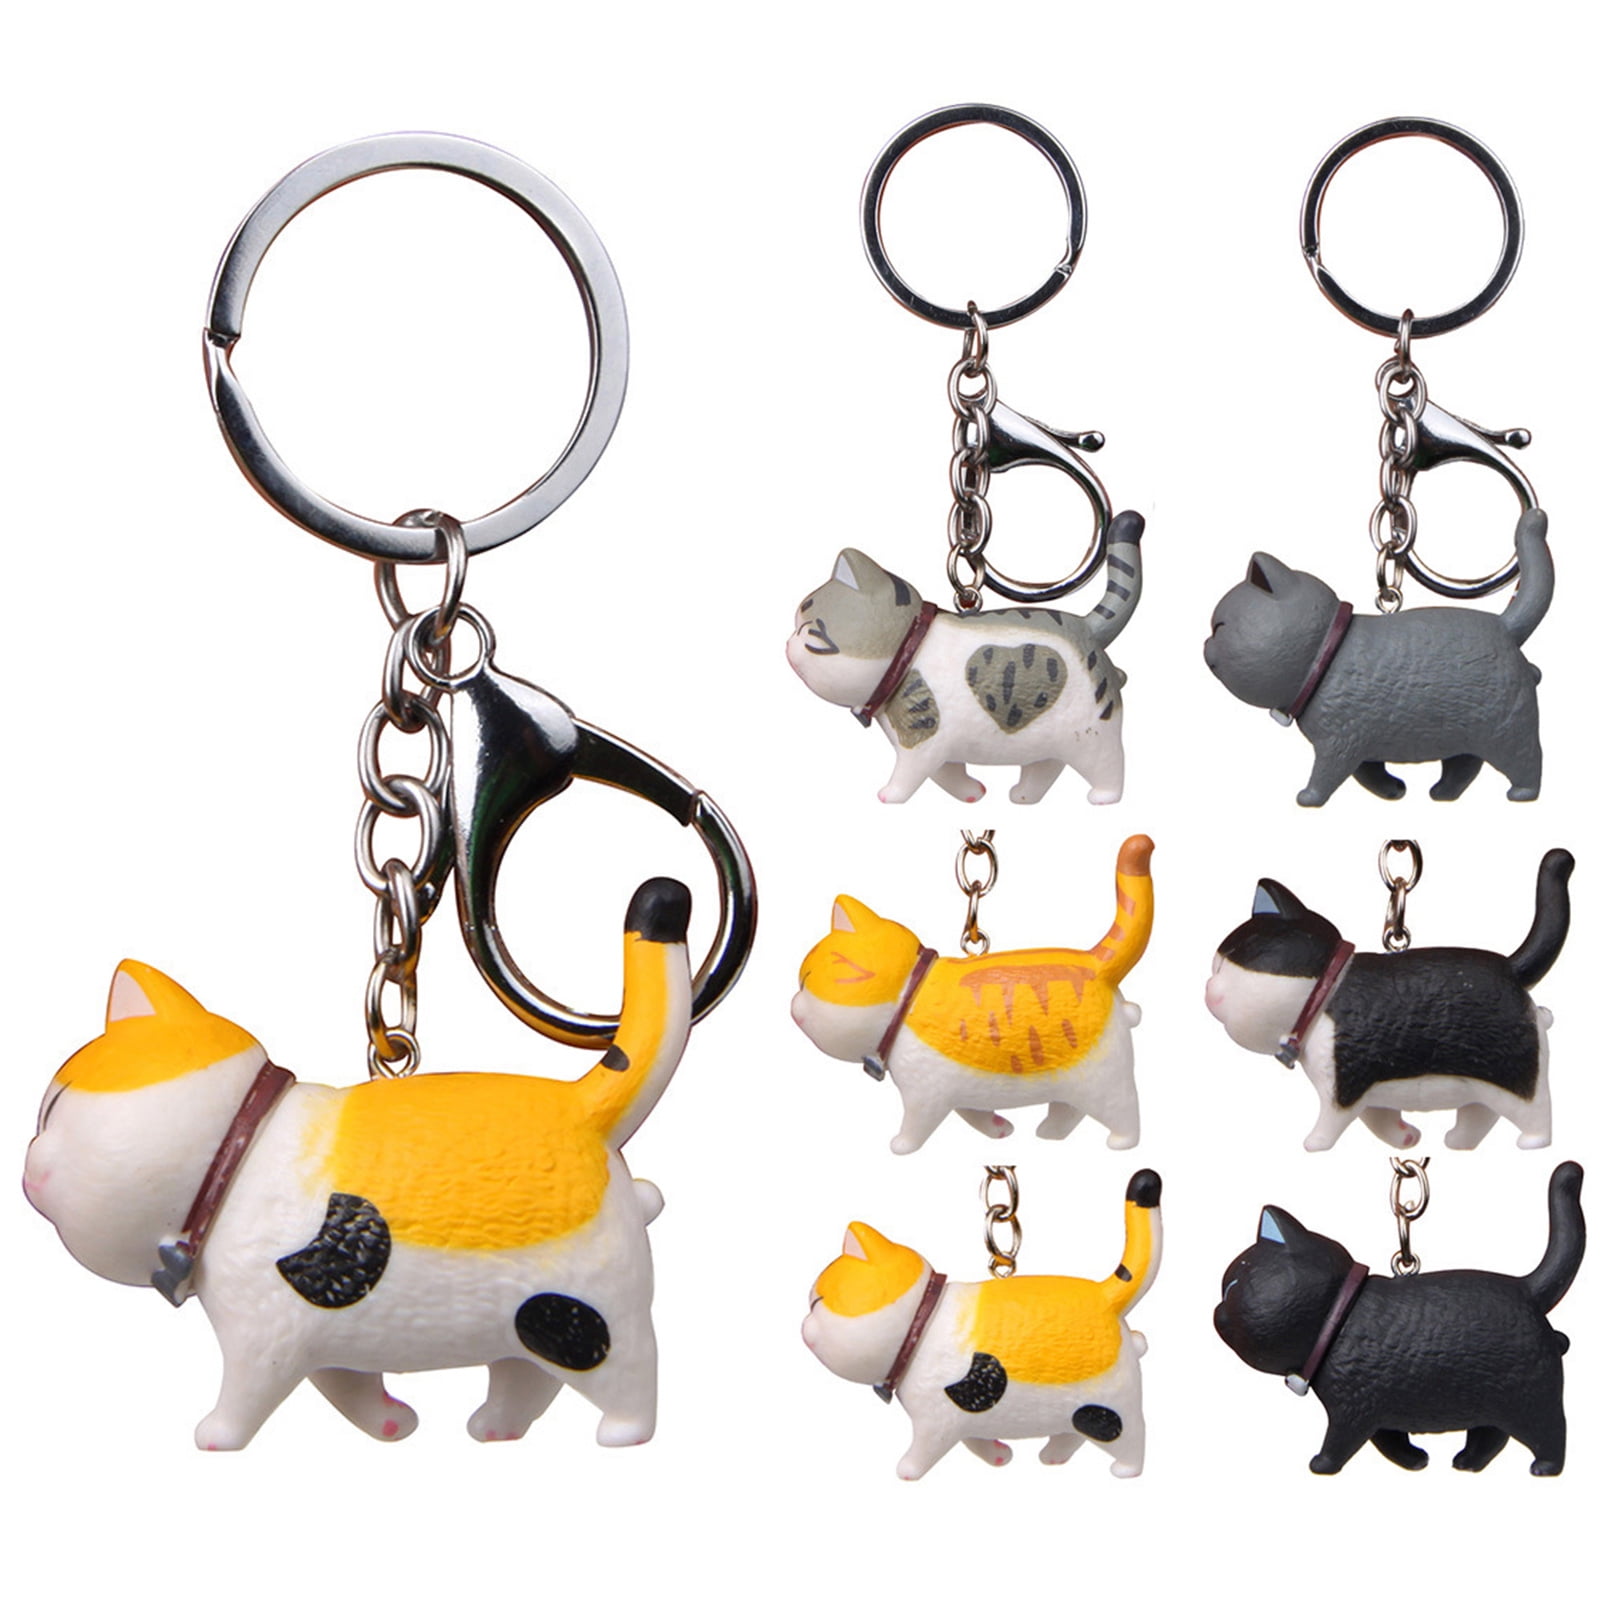 Novelty Cat Mum Gifts Kitten Birthday Cute Funny Keyring Gifts From The Cat 